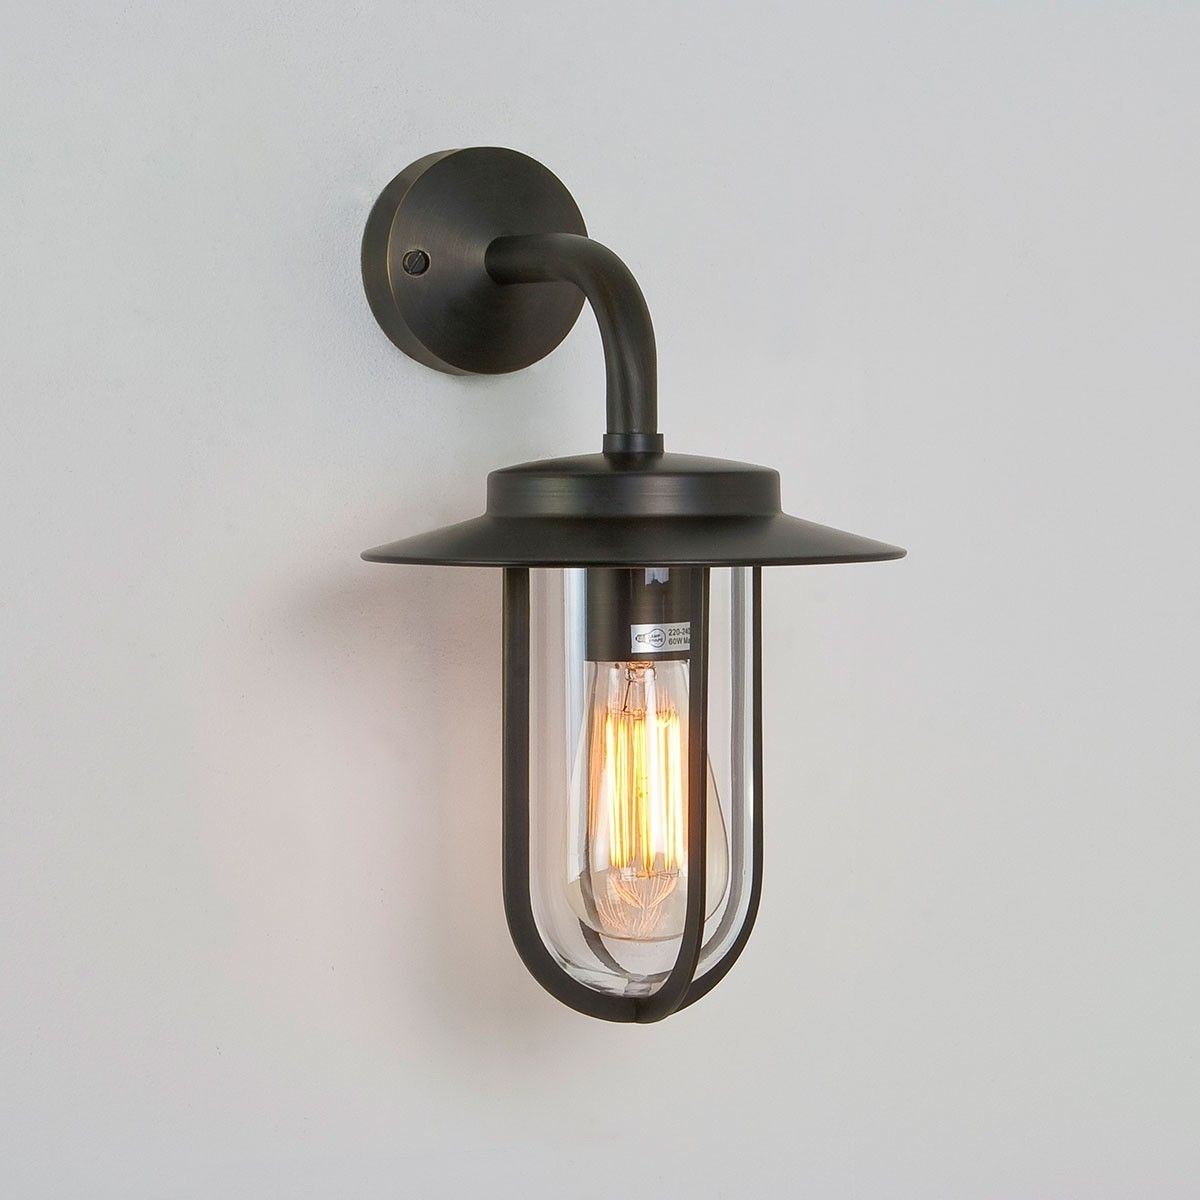 Furniture : Astro Montparnasse Wall Bronze Outdoor Light Electrical For Bunnings Outdoor Wall Lighting (View 5 of 15)